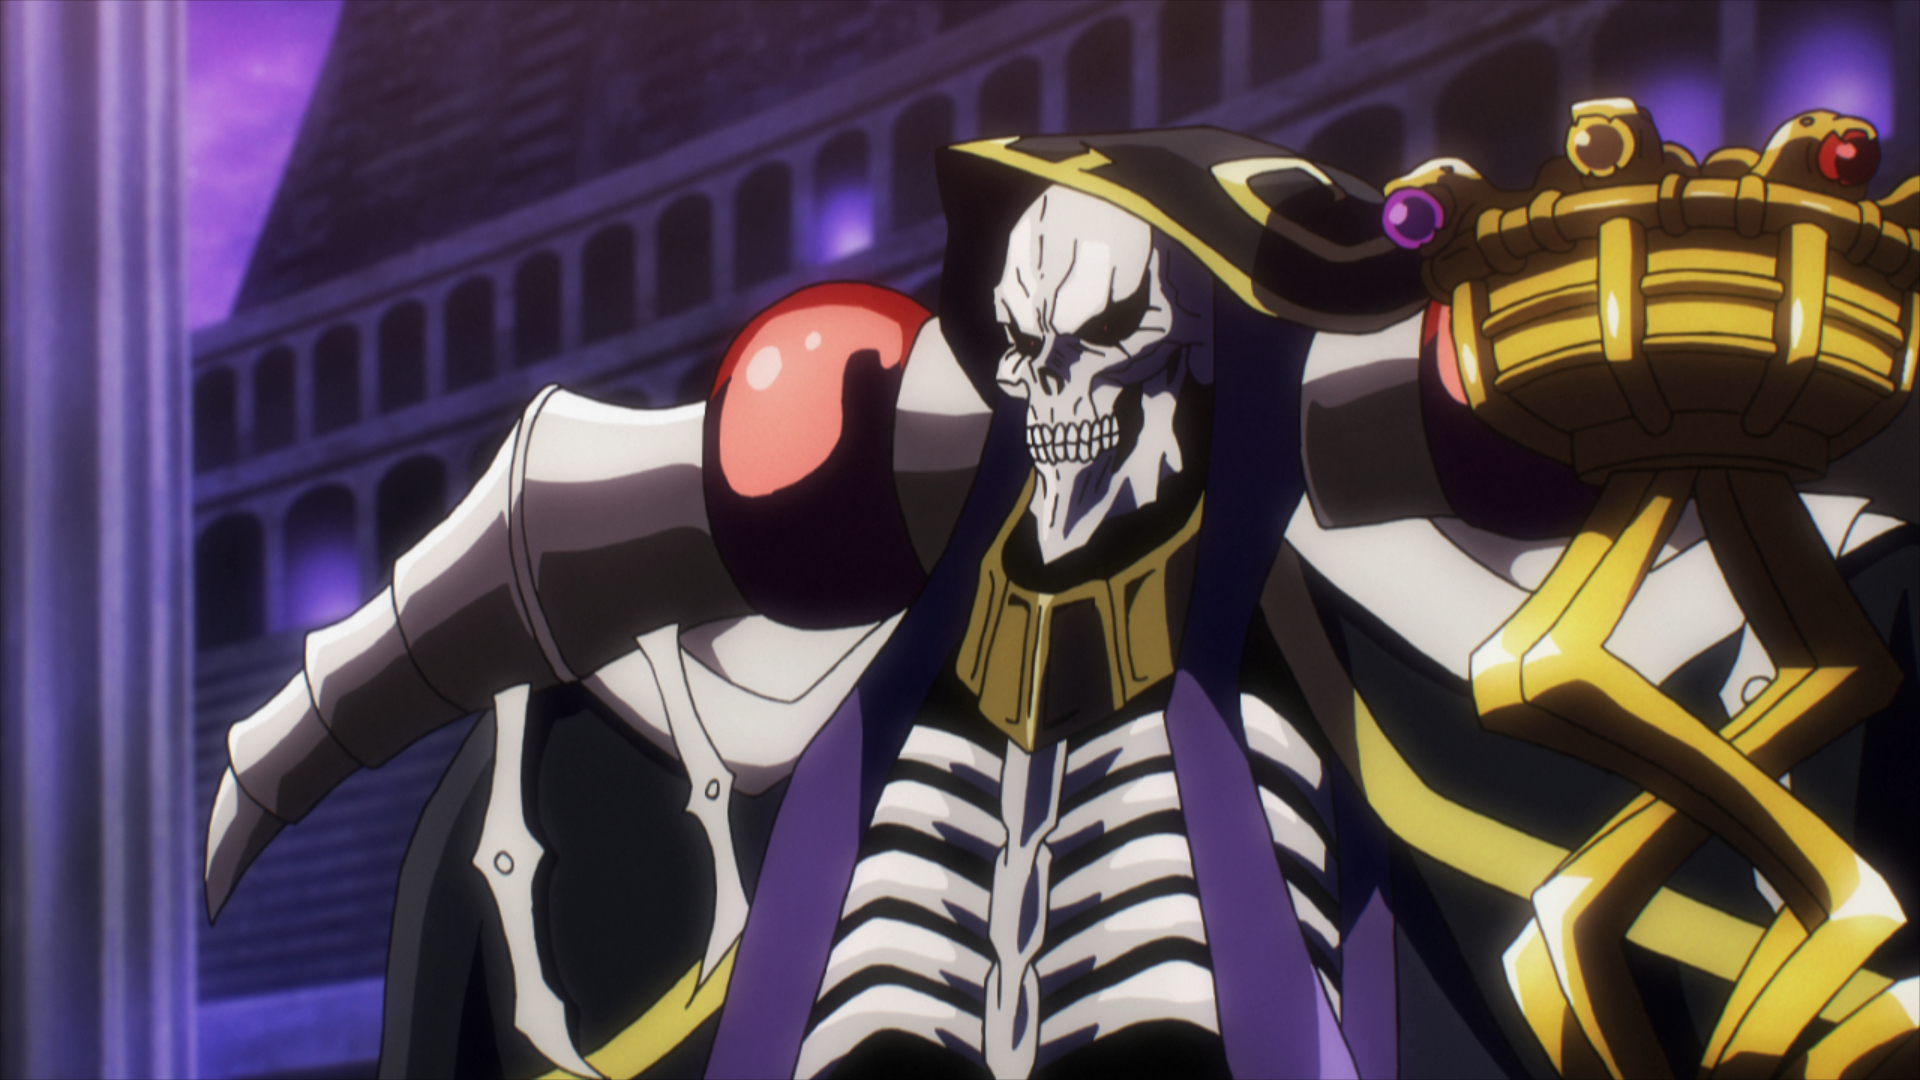 Ainz Ooal Gown from Overlord